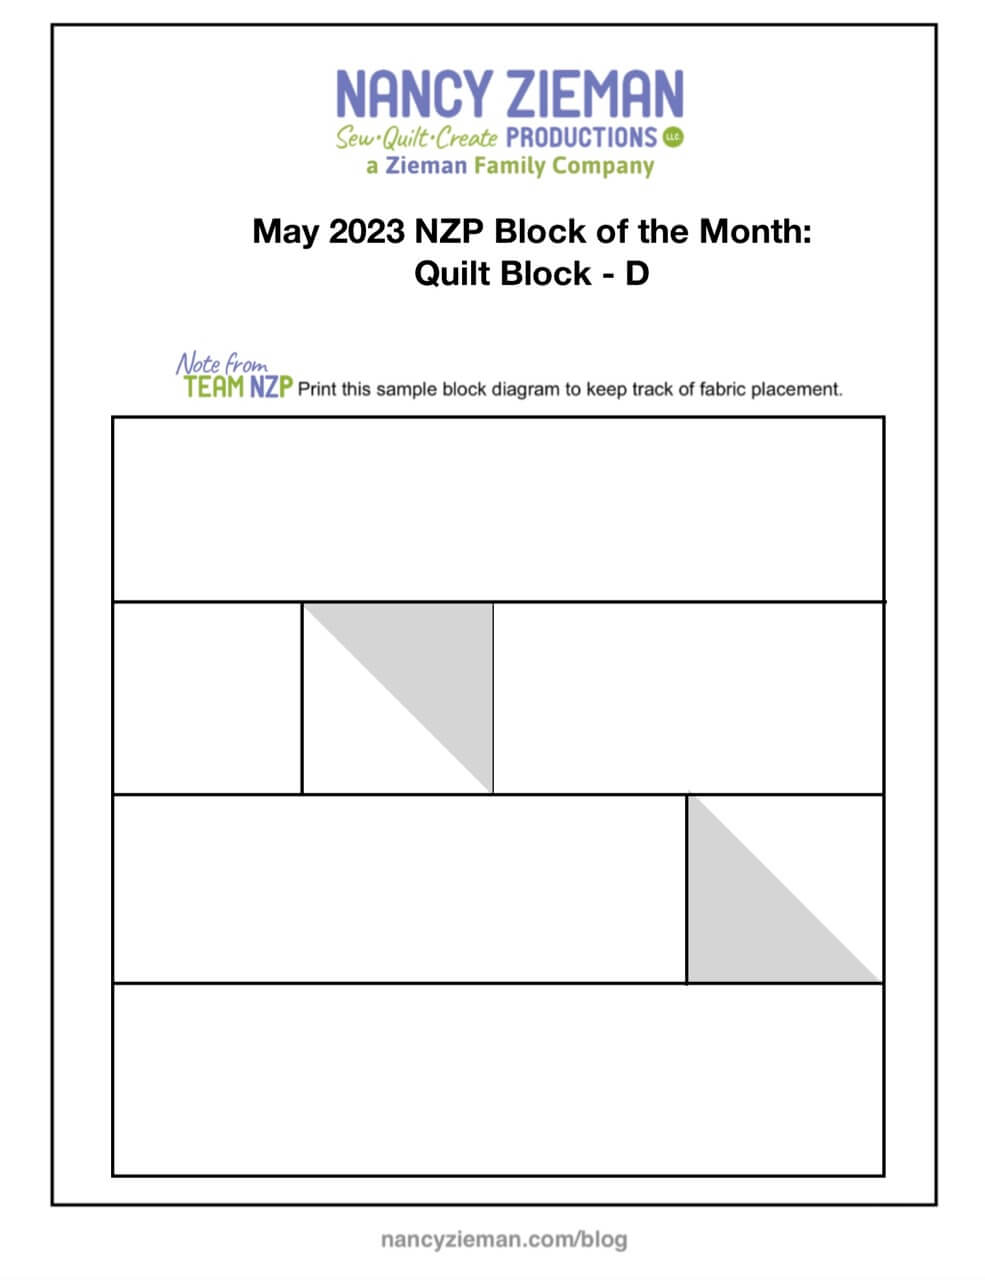 May 2023 NZP Block of the Month Planner